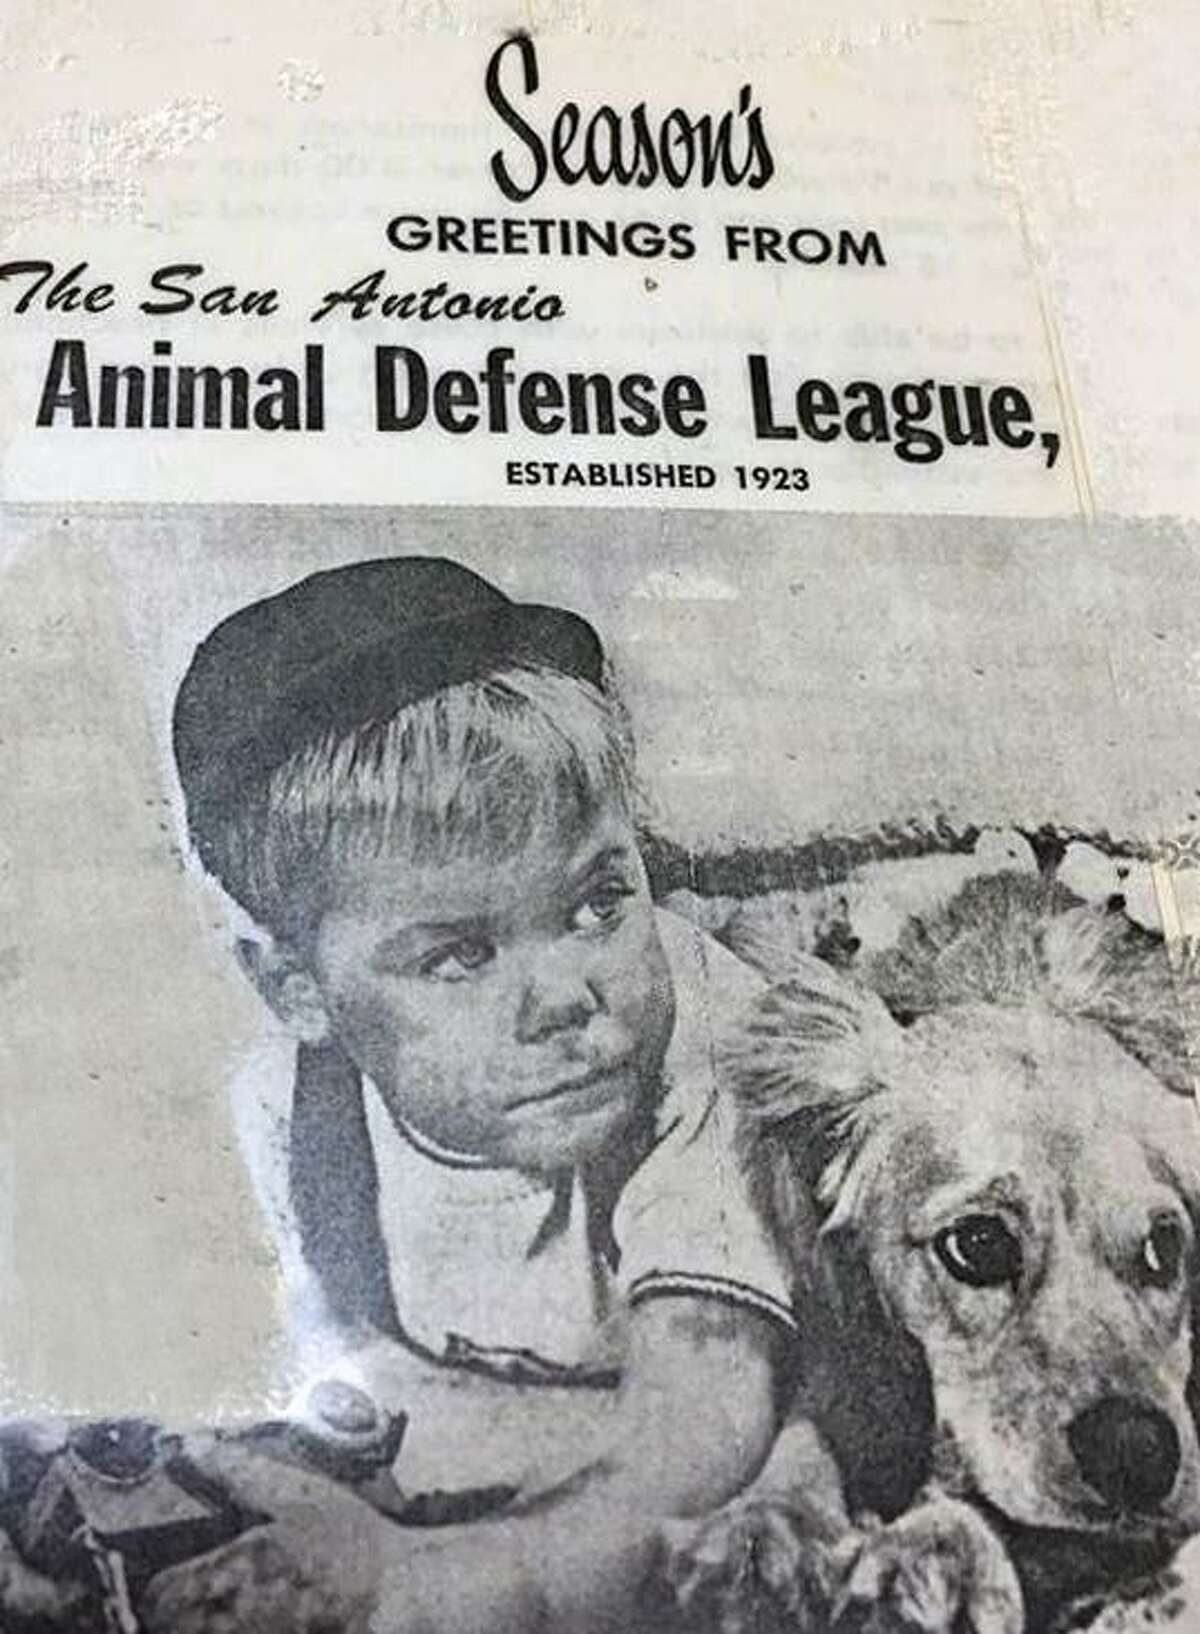 An old picture hangs on a wall at the Animal Defense League, founded in 1901 as the San Antonio Child Protective and Humane Society and spun off as a separate organization named the Animal Defense League, chartered in 1934.